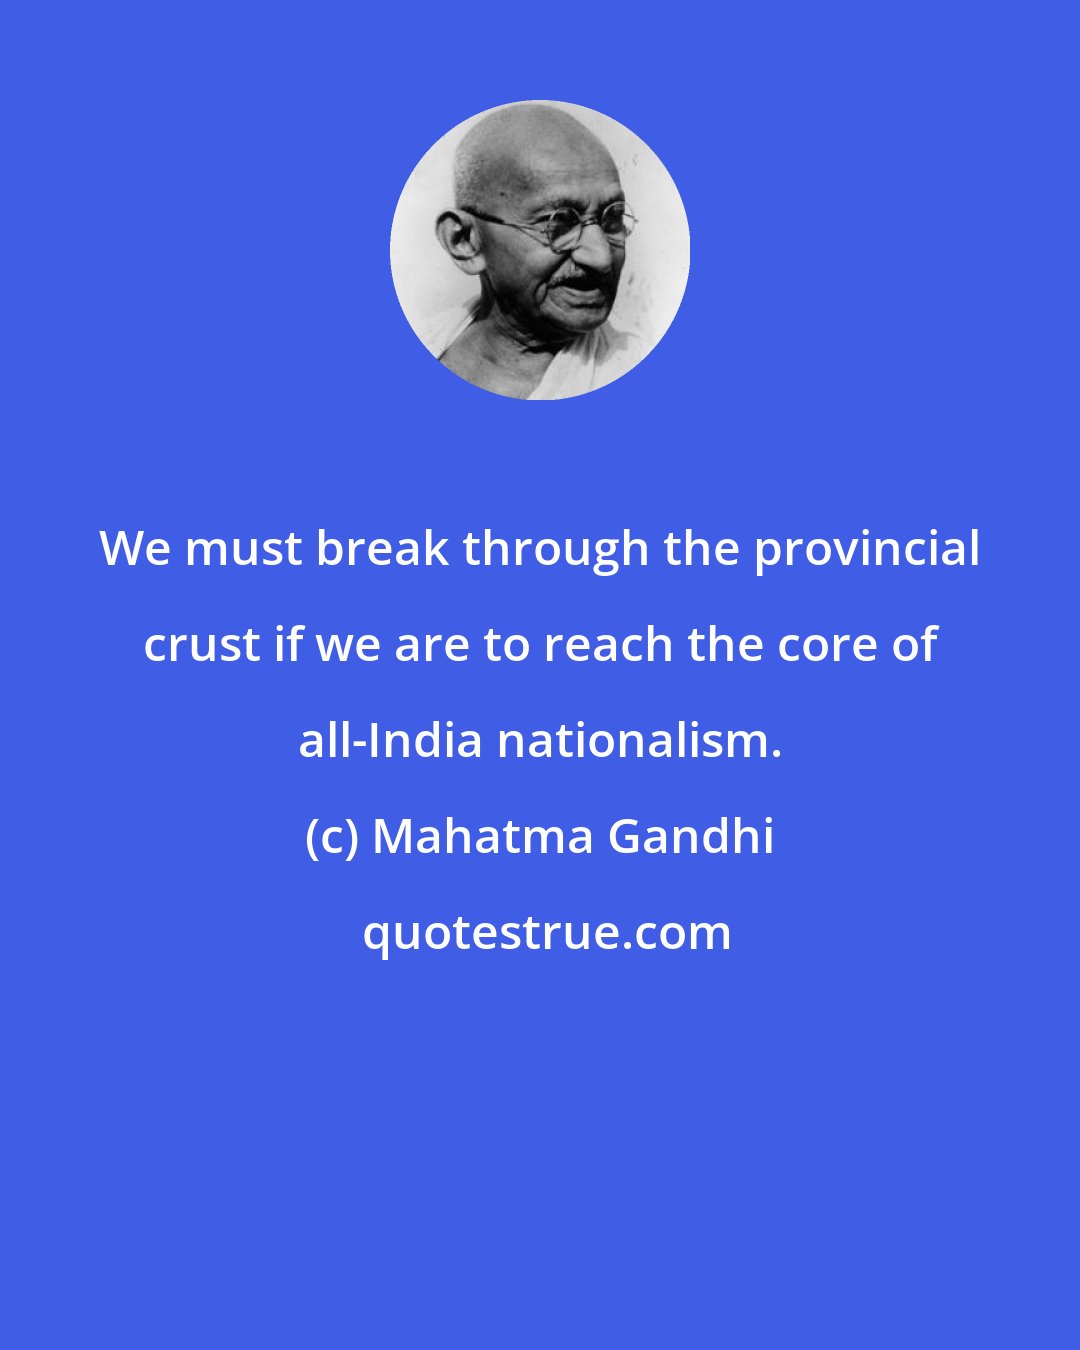 Mahatma Gandhi: We must break through the provincial crust if we are to reach the core of all-India nationalism.